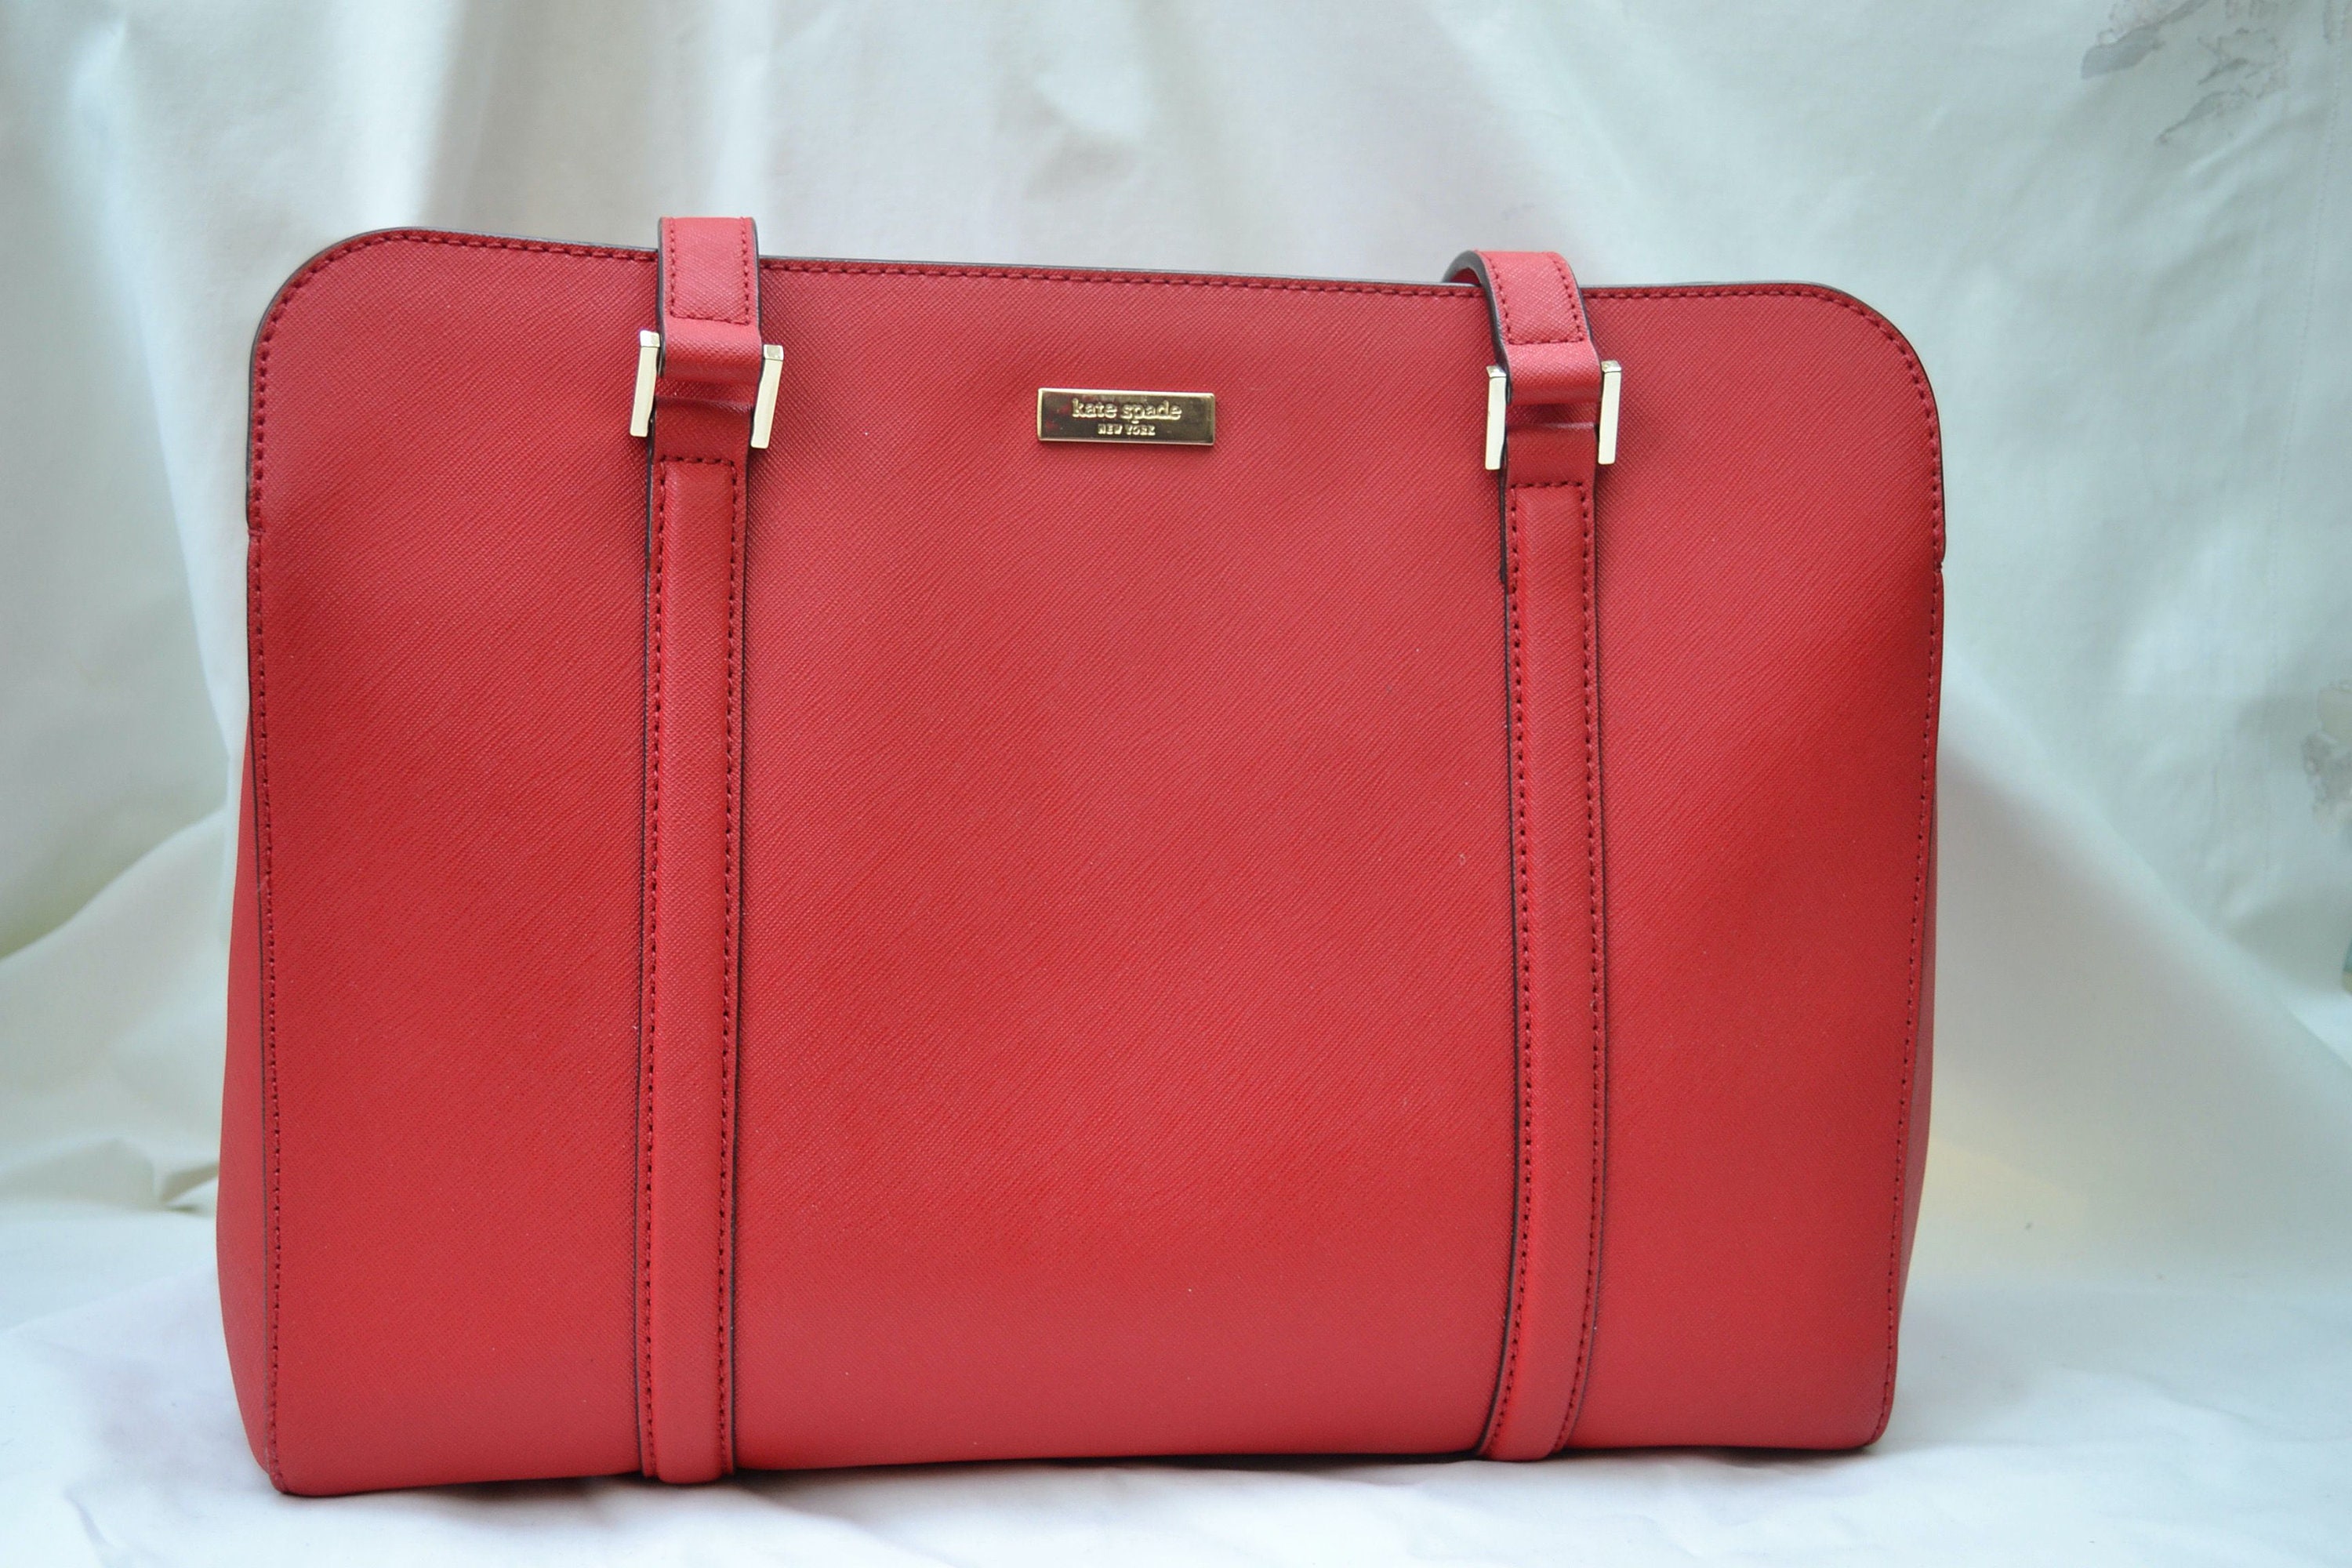 Kate Spade red leather handbag tote - clothing & accessories - by owner -  apparel sale - craigslist